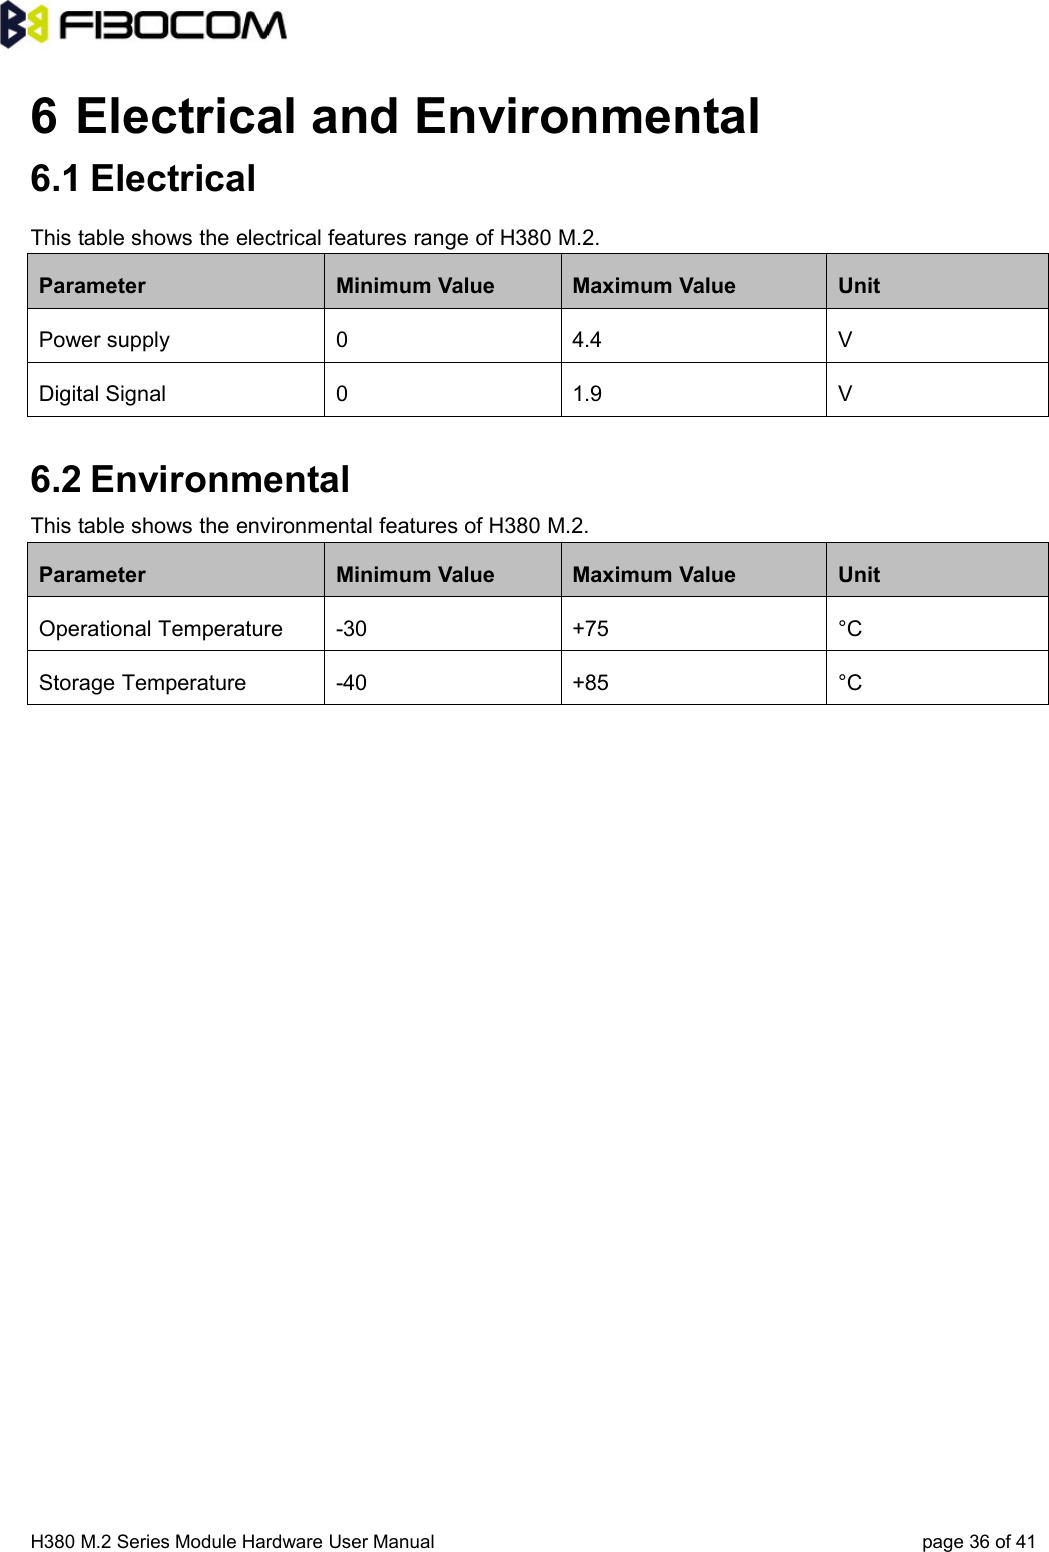 H380 M.2 Series Module Hardware User Manual page 36 of 416 Electrical and Environmental6.1 ElectricalThis table shows the electrical features range of H380 M.2.Parameter Minimum Value Maximum Value UnitPower supply 0 4.4 VDigital Signal 0 1.9 V6.2 EnvironmentalThis table shows the environmental features of H380 M.2.Parameter Minimum Value Maximum Value UnitOperational Temperature -30 +75 °CStorage Temperature -40 +85 °C